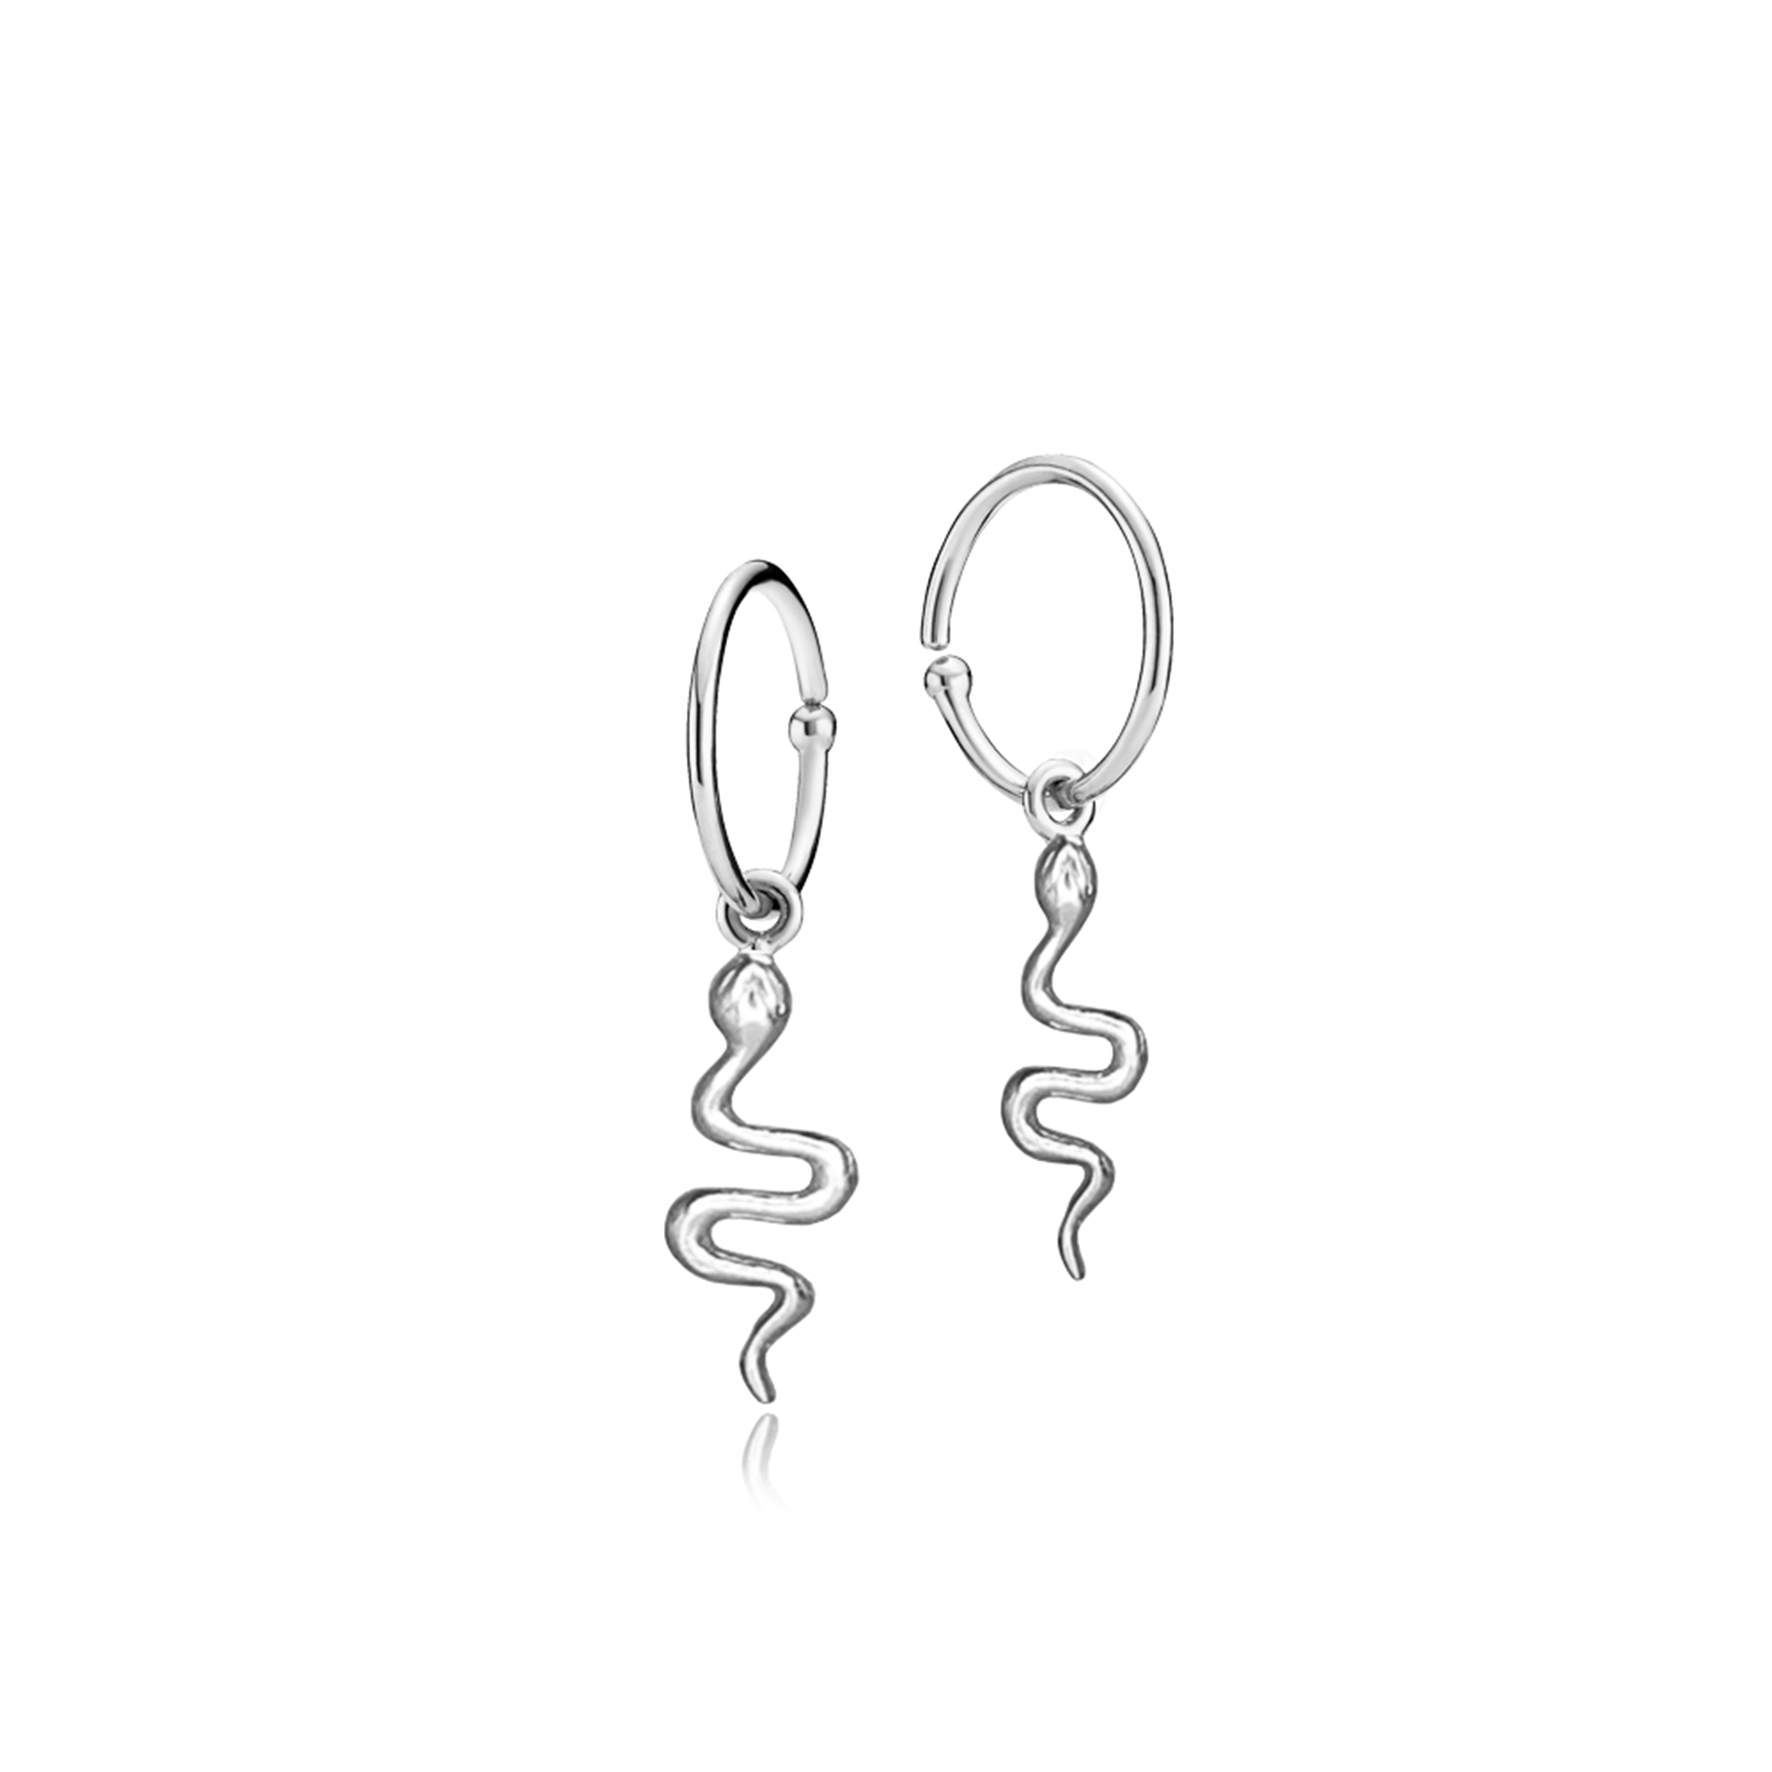 Young One Snake creol earrings von Sistie in Silber Sterling 925